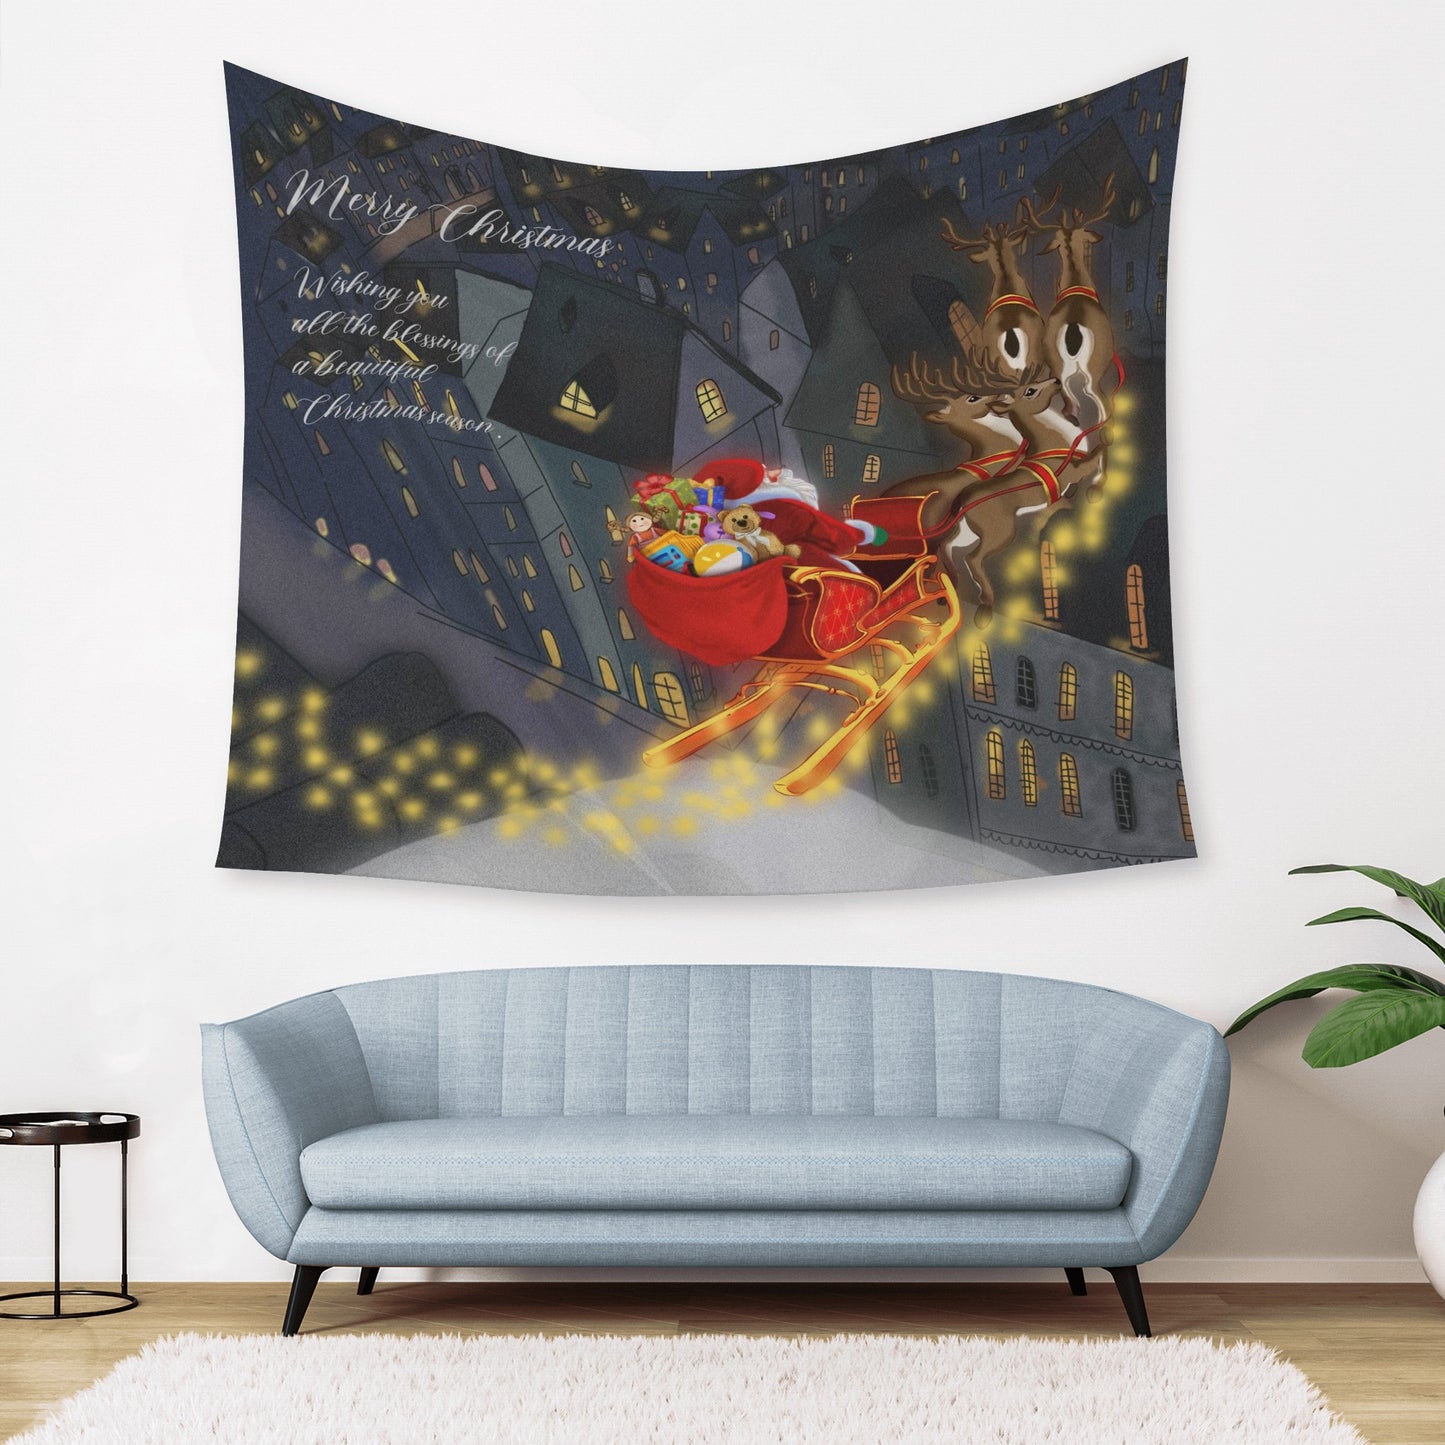 A Christmas Wish For All  Wall Tapestry